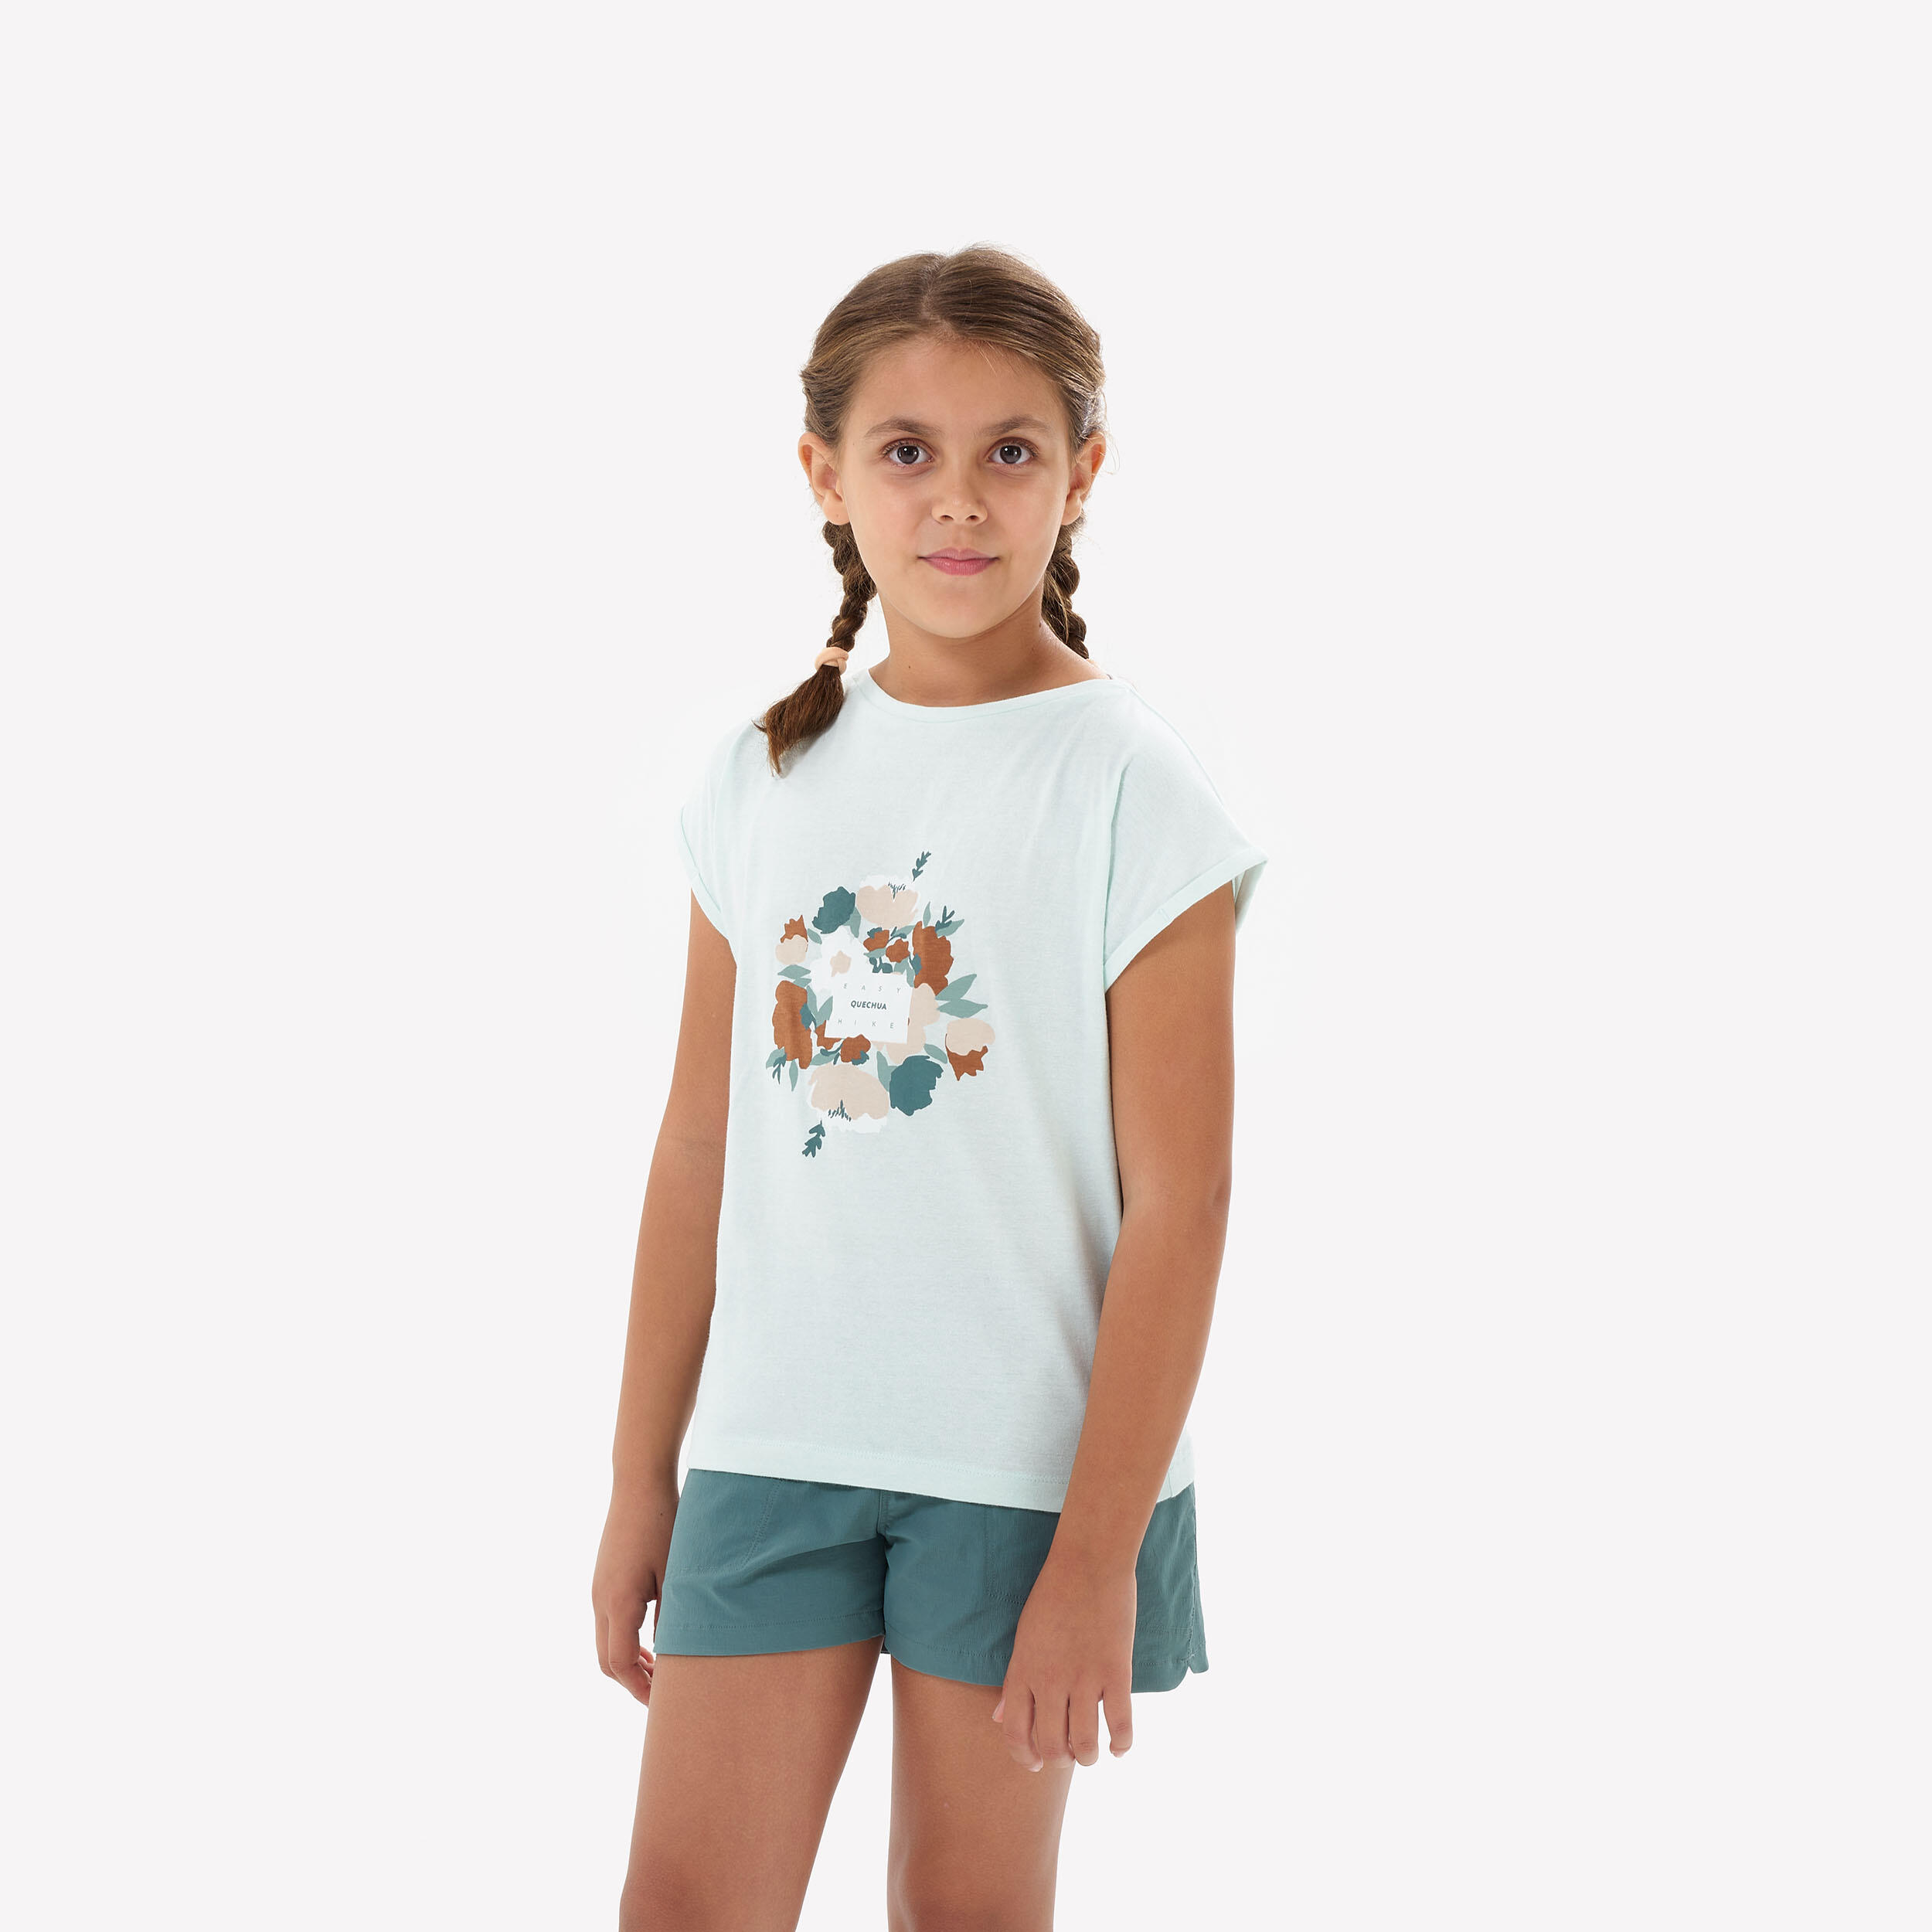 QUECHUA Girls’ Hiking T-Shirt - MH100 Ages 7-15 - Turquoise